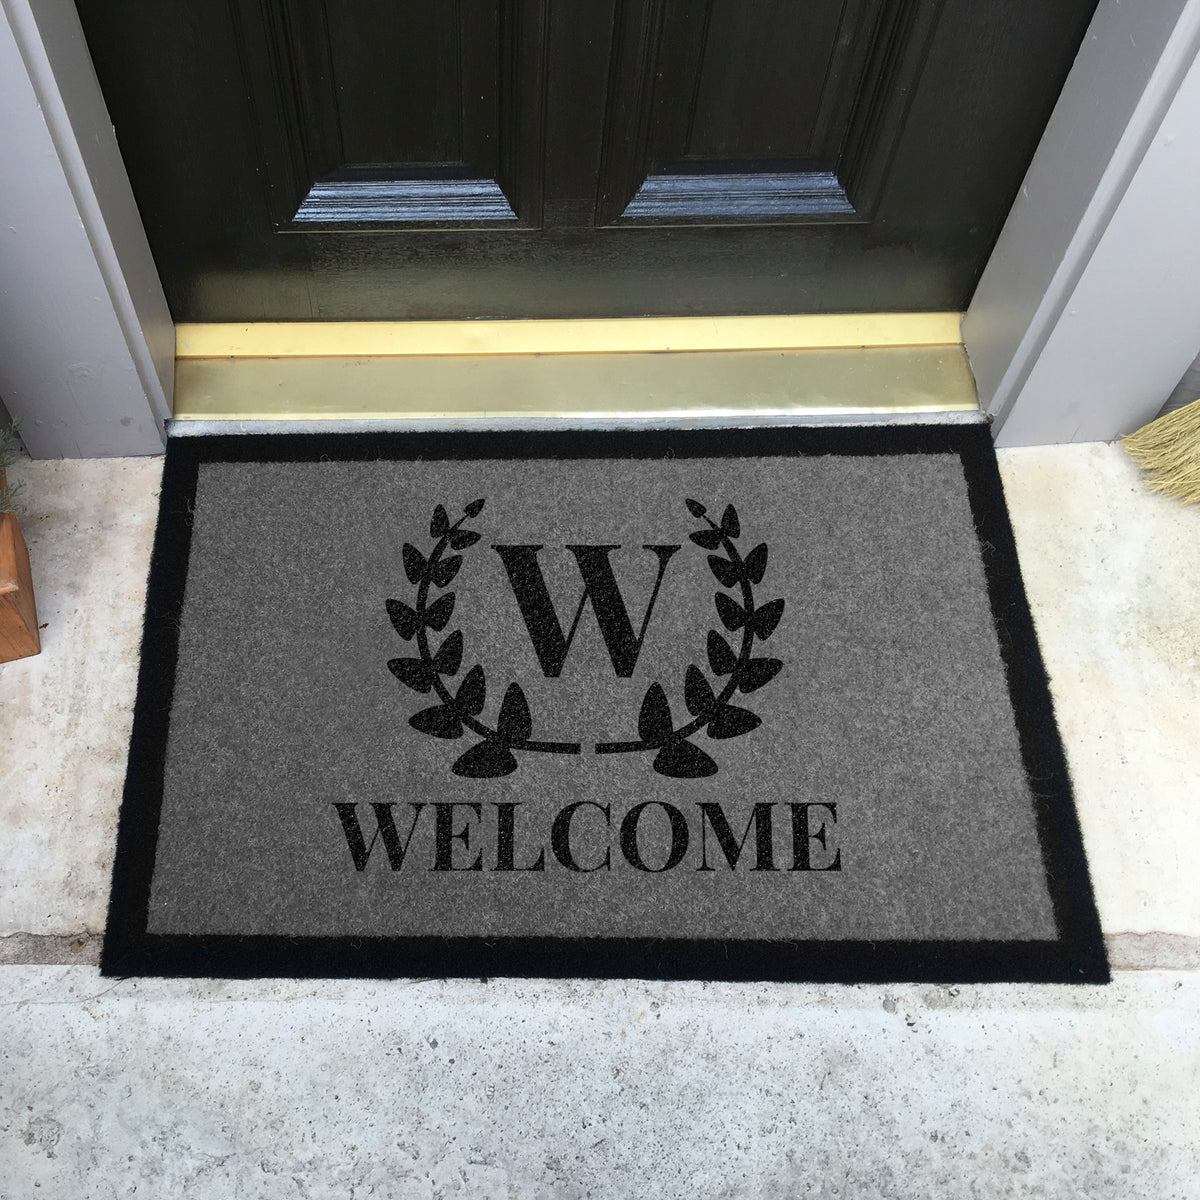 Infinity Custom Mats™ All-Weather Personalized Door Mat - STYLE: WREATH COLOR: GREY / BLACK - rugsthatfit.com